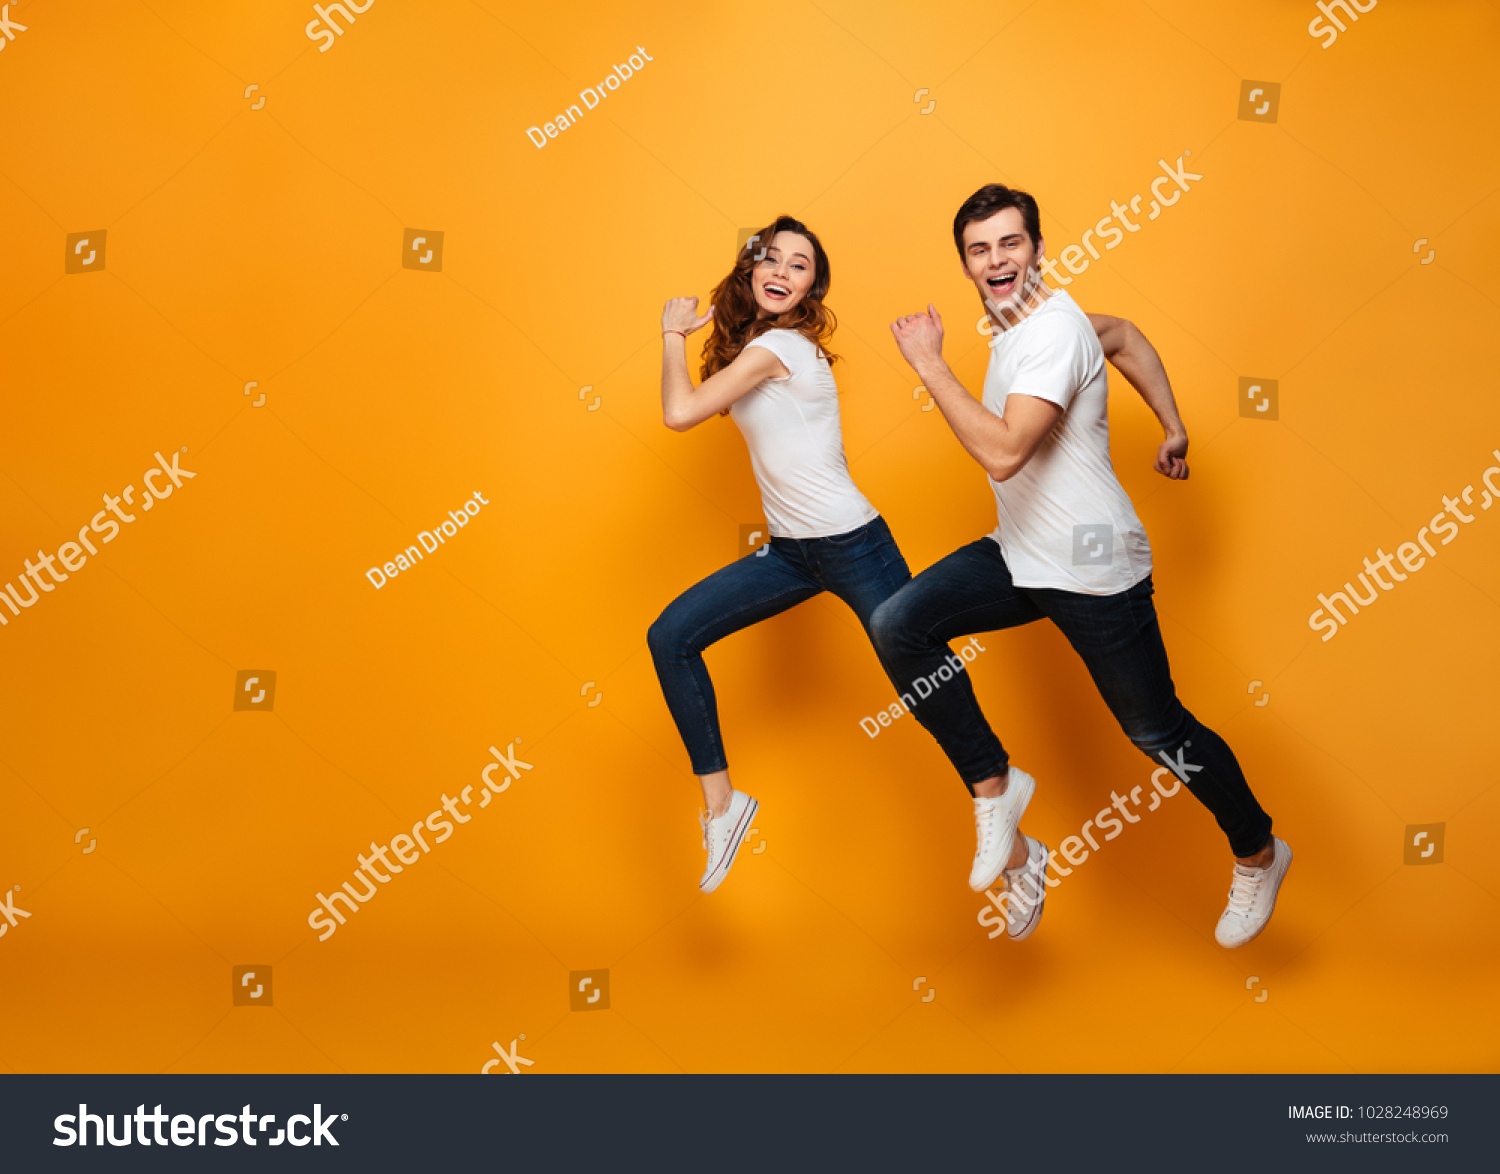 Young lovely cheerful couple posing together on camera while running or jumping along yellow background #1028248969